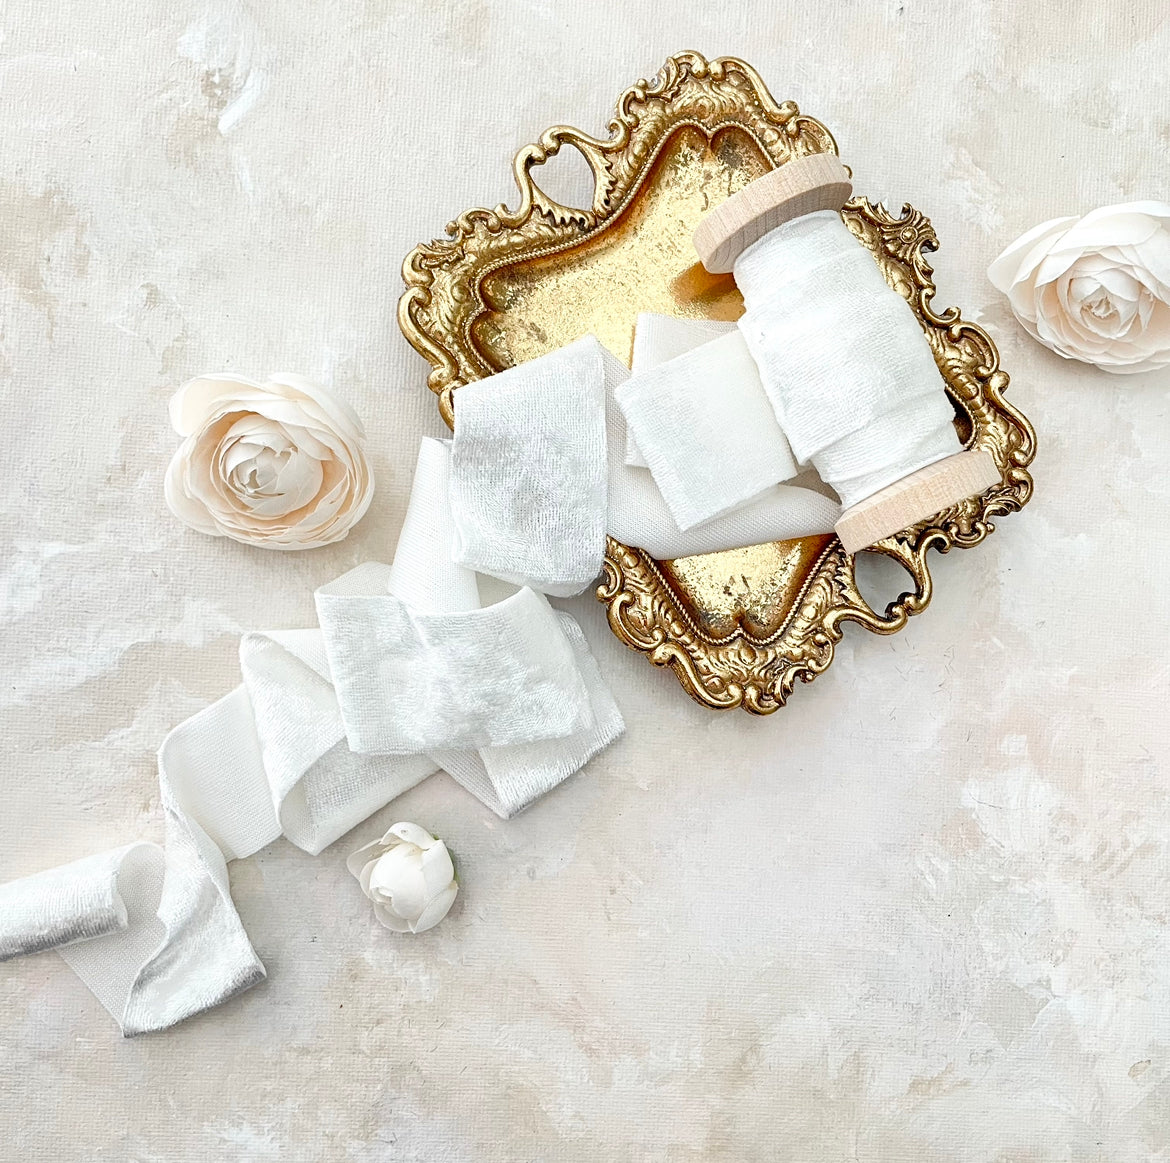 Velvet diamond white ribbon on gold vintage tray  - Wedding Flat lay props from Champagne & GRIT